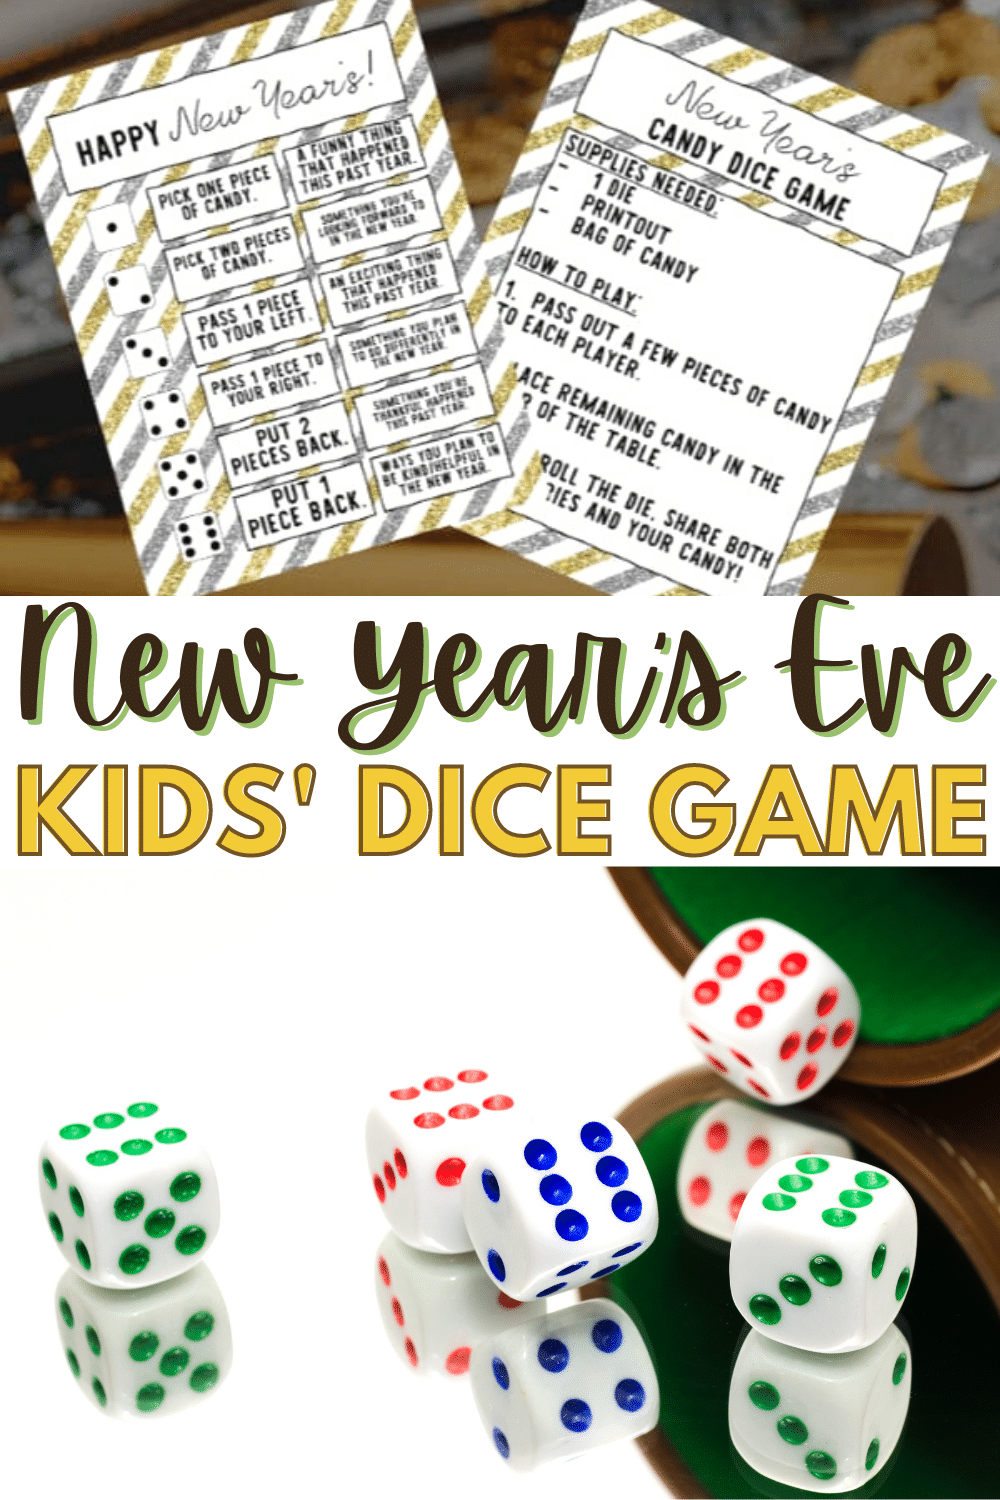 This simple New Year Dice Game for Kids is played with dice and candy and comes with a free printable too. There will be lots of laughs with this fun game. #newyears #dicegames #activitiesforkids via @wondermomwannab